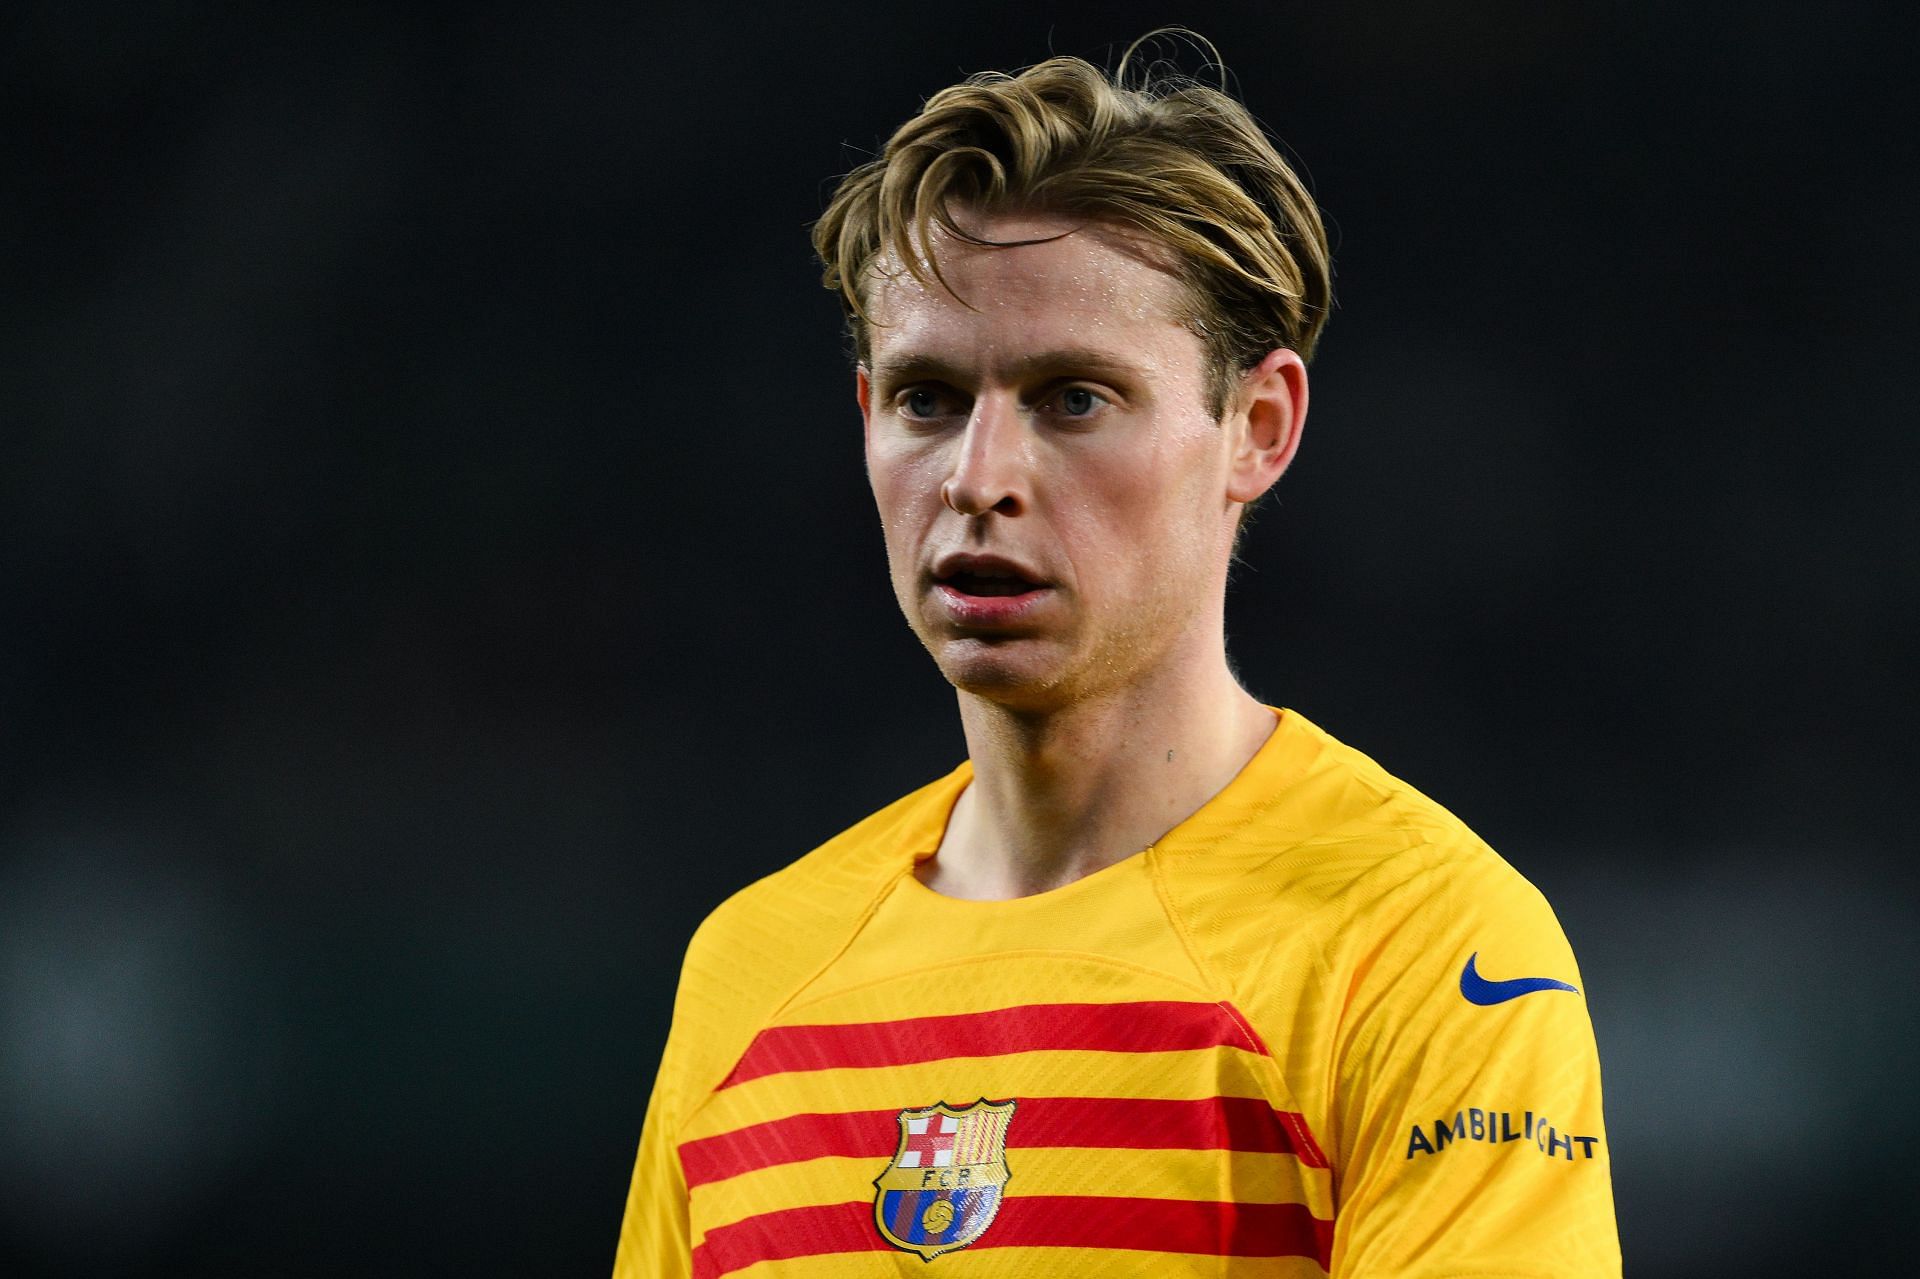 Frenkie de Jong could be on his way out of the Camp Nou.